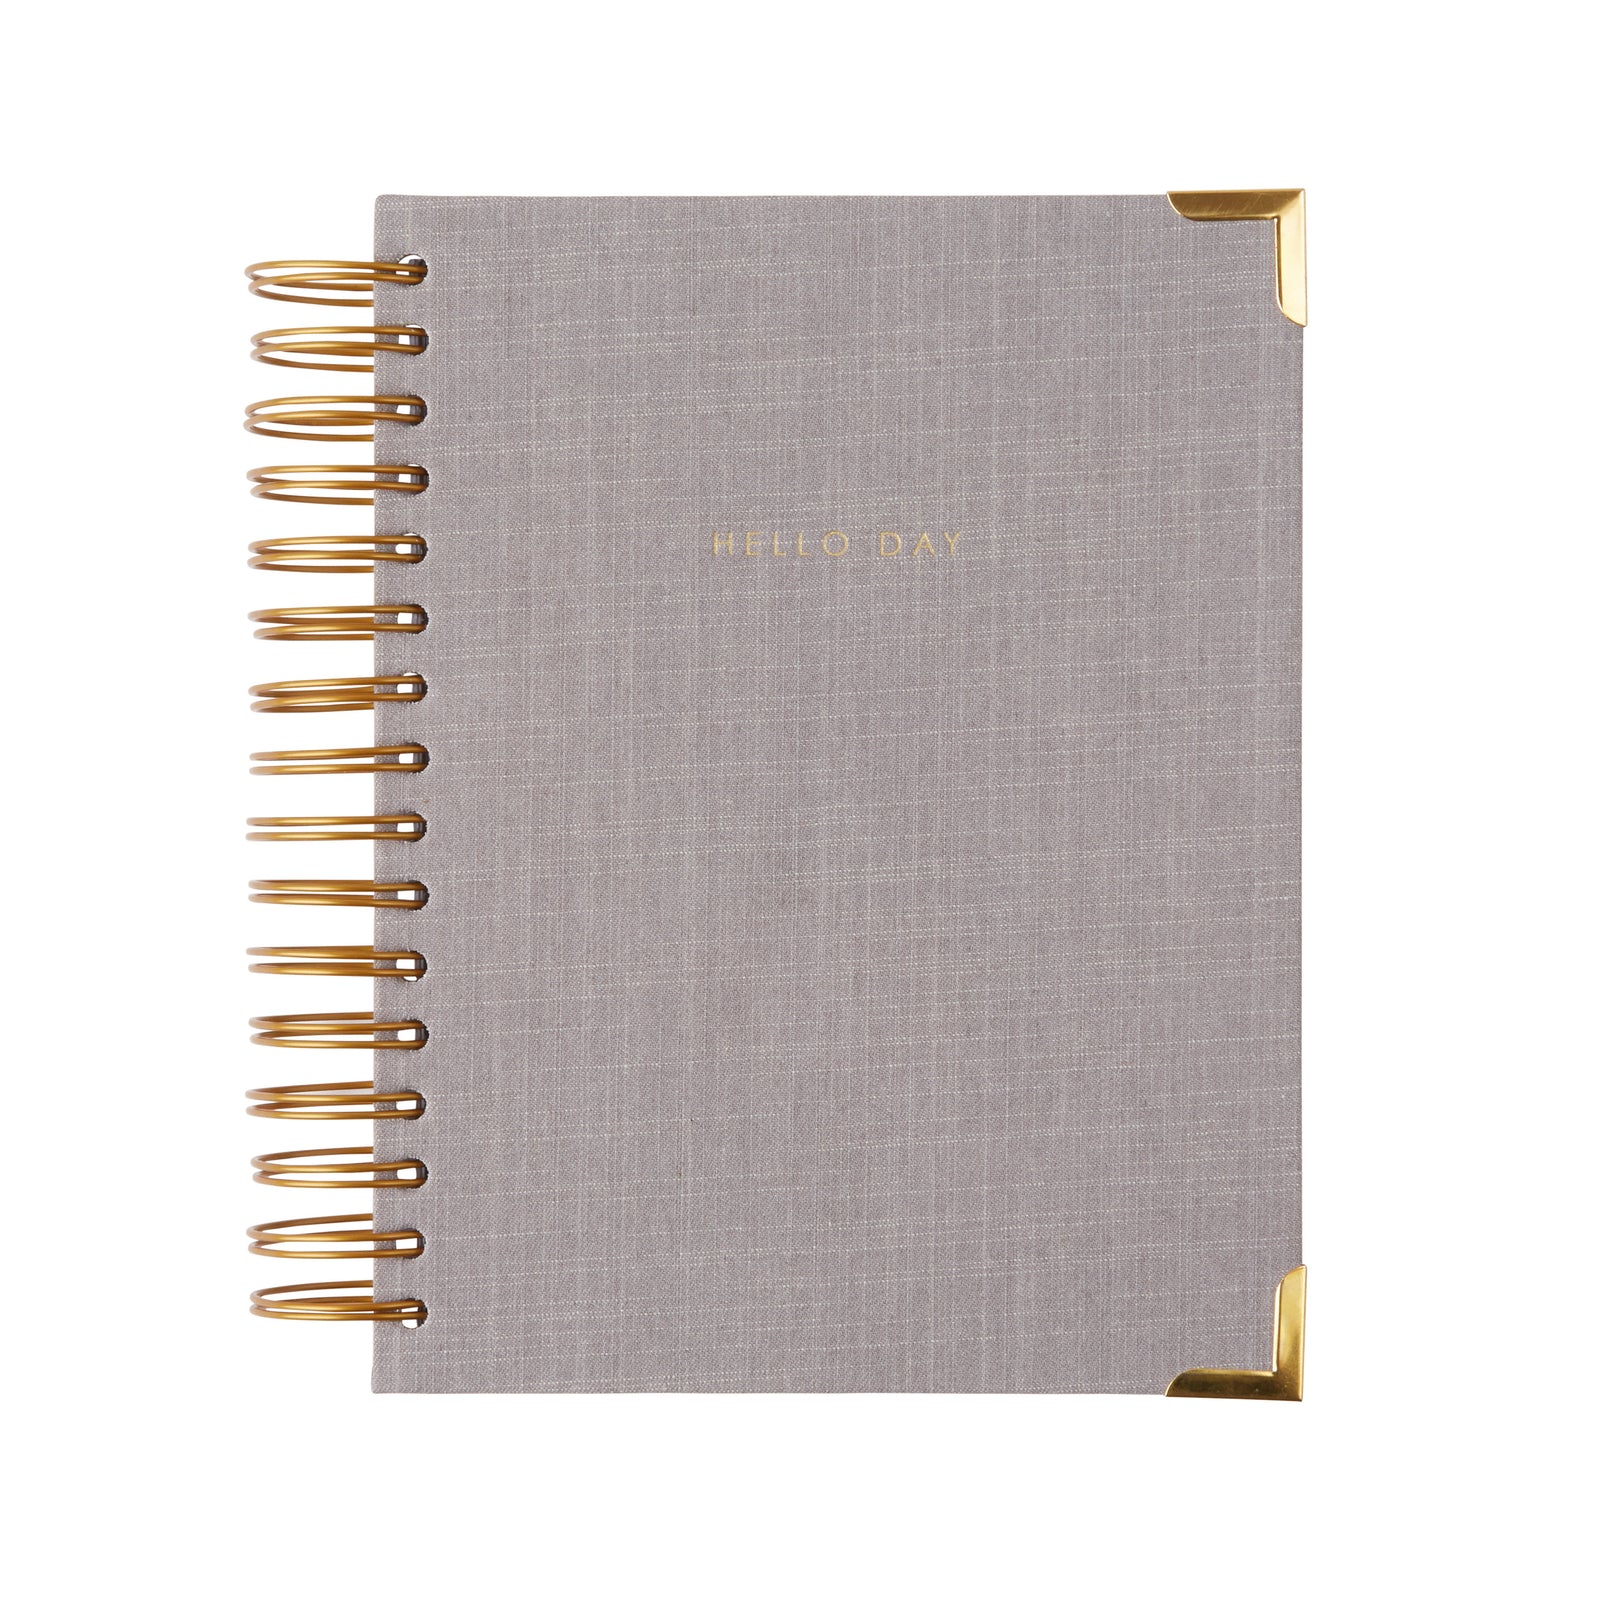 PLANNERS - Hello Day